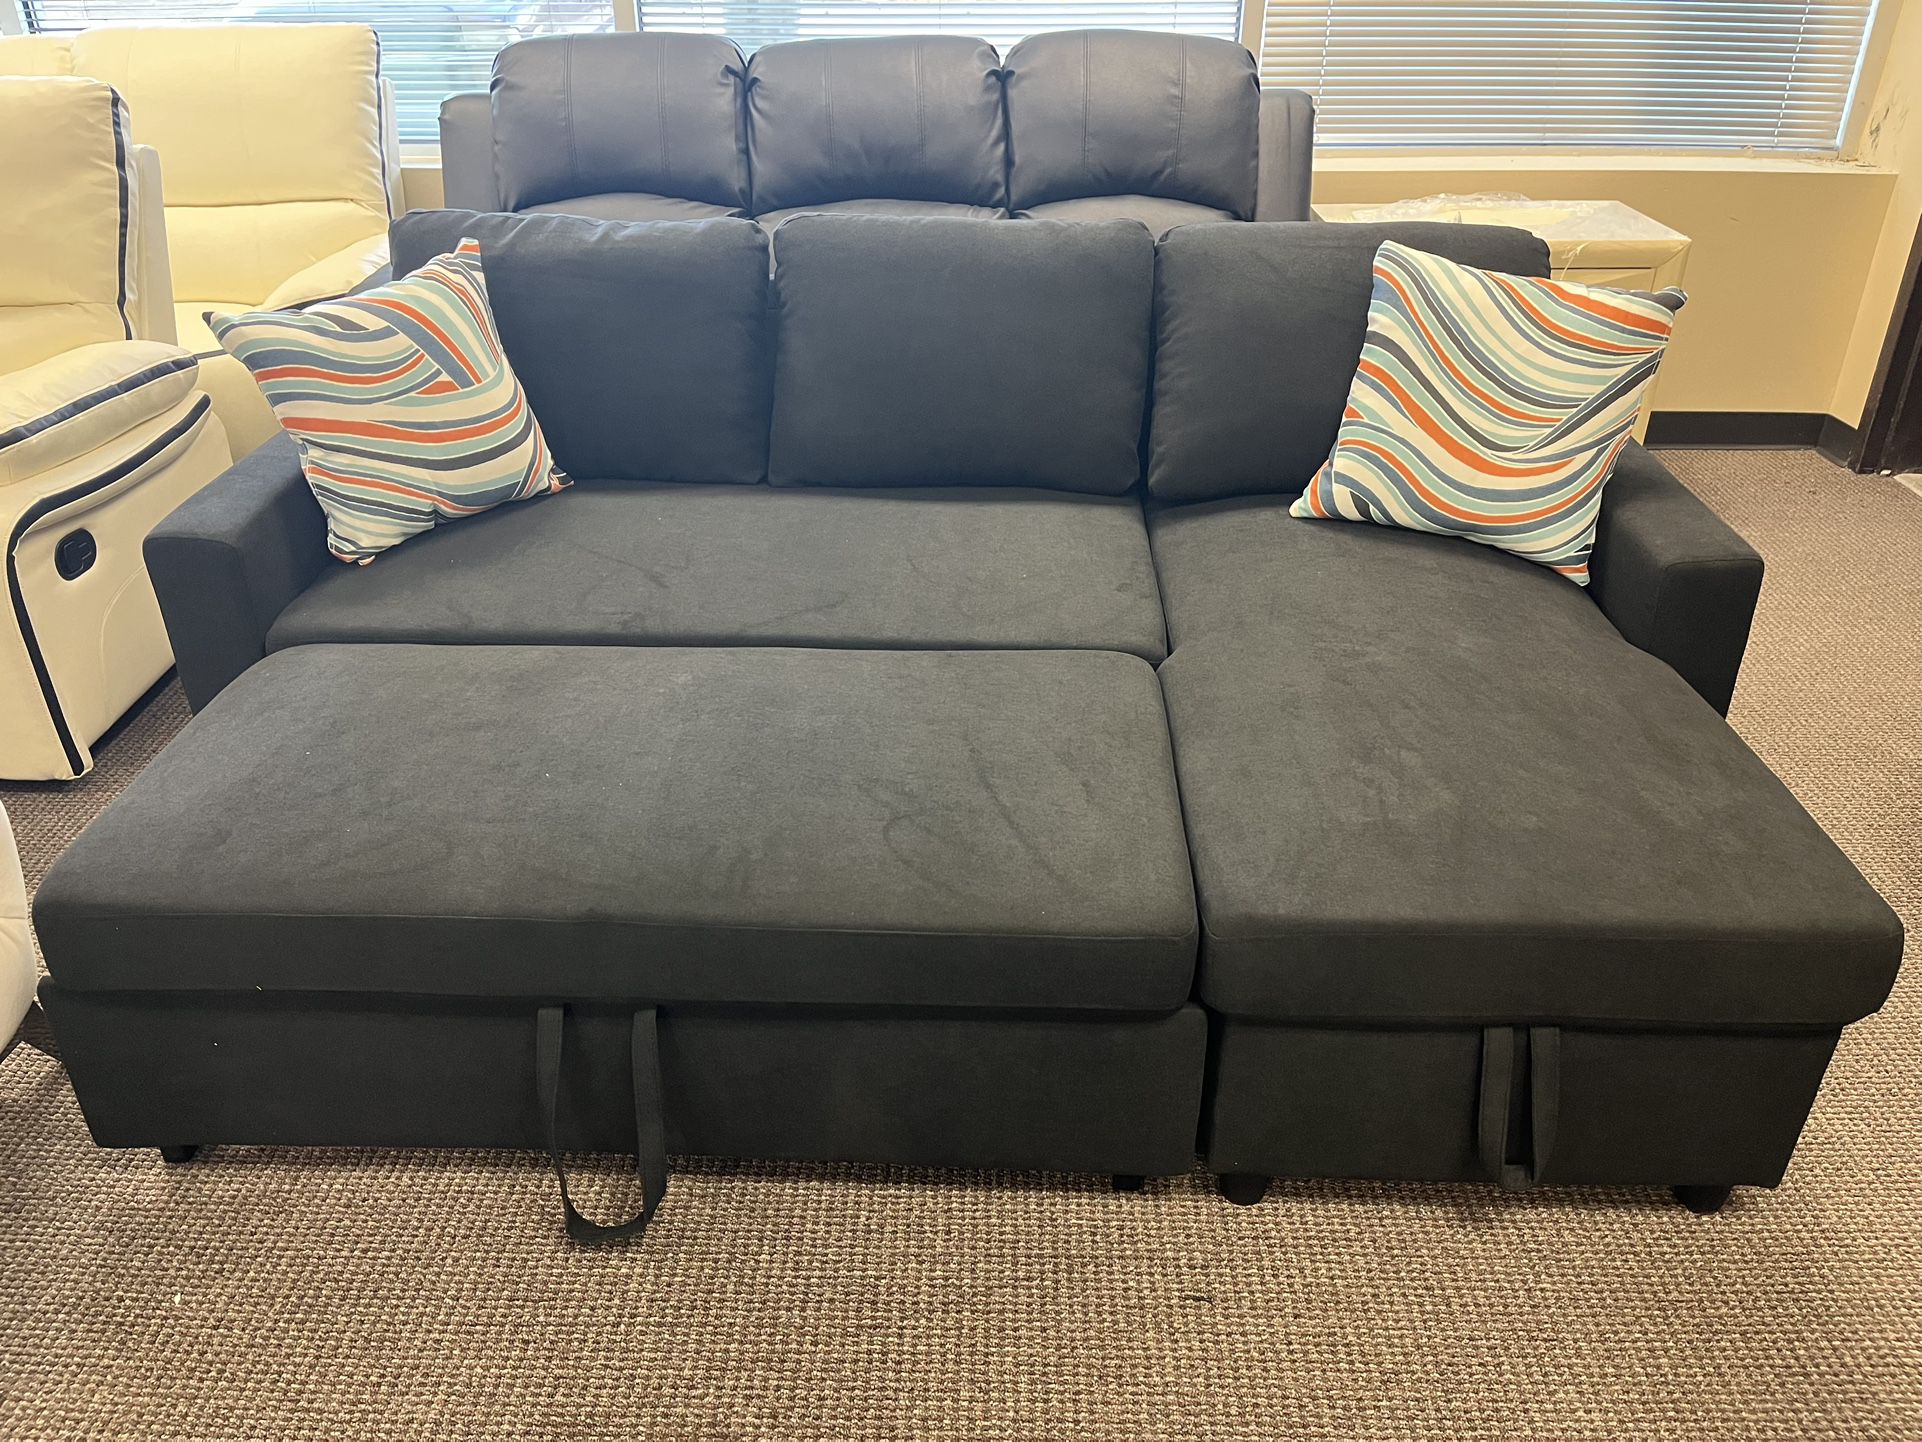 New Black Sofa Bed Sectional Reversible Sleeper Couch Include Storage Chaise And 2 Pillows 